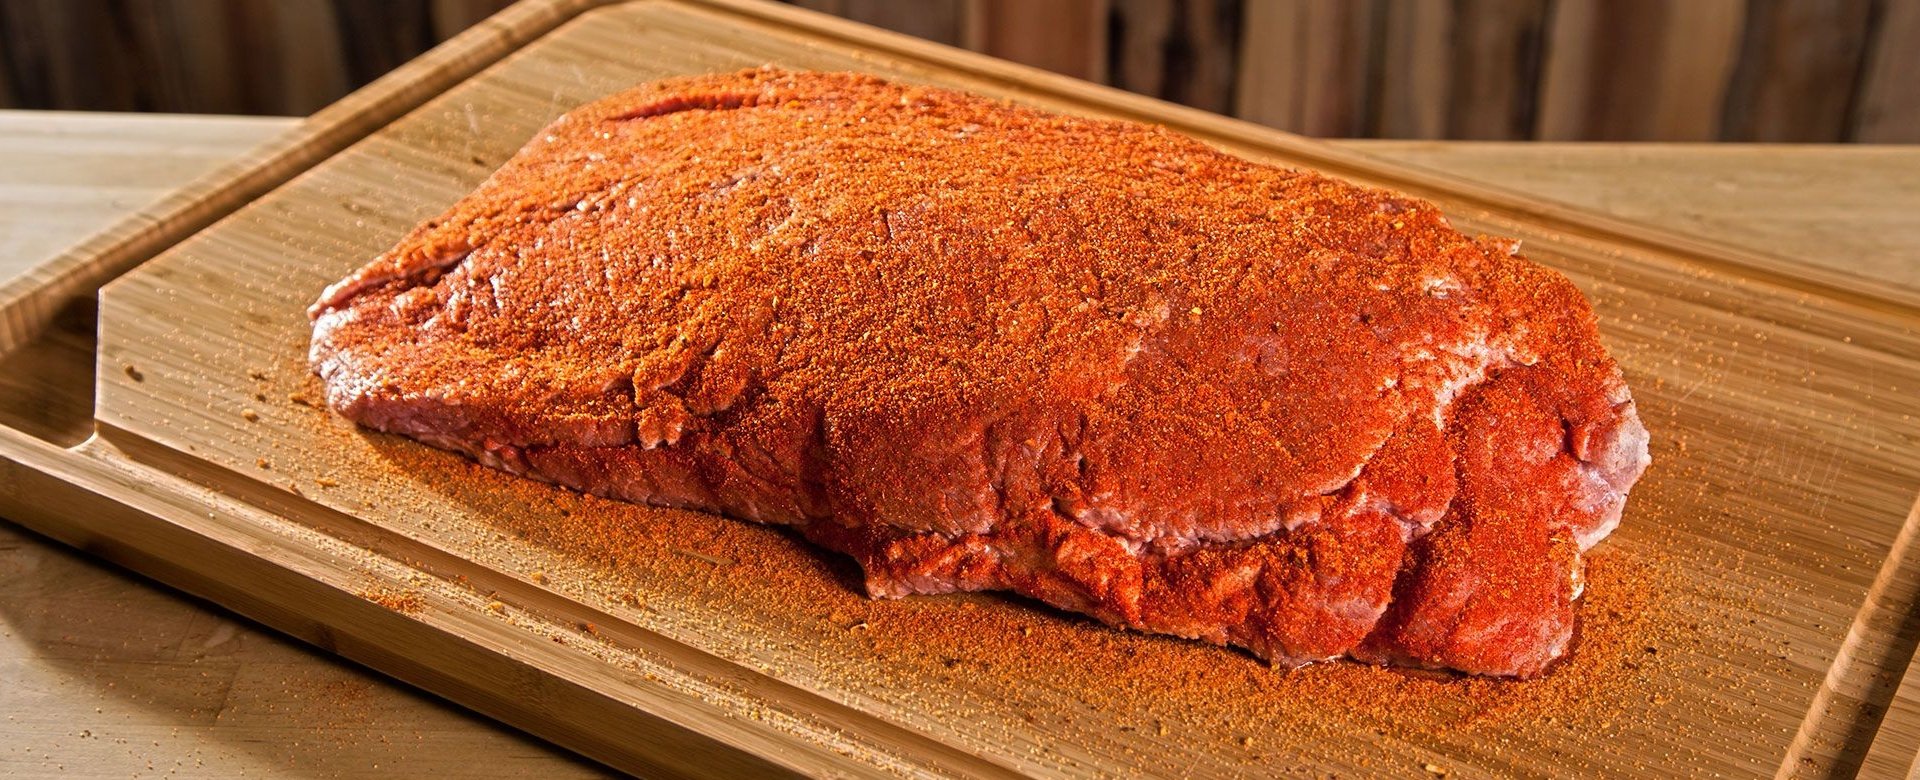 First Timer's Guide to Cooking Brisket